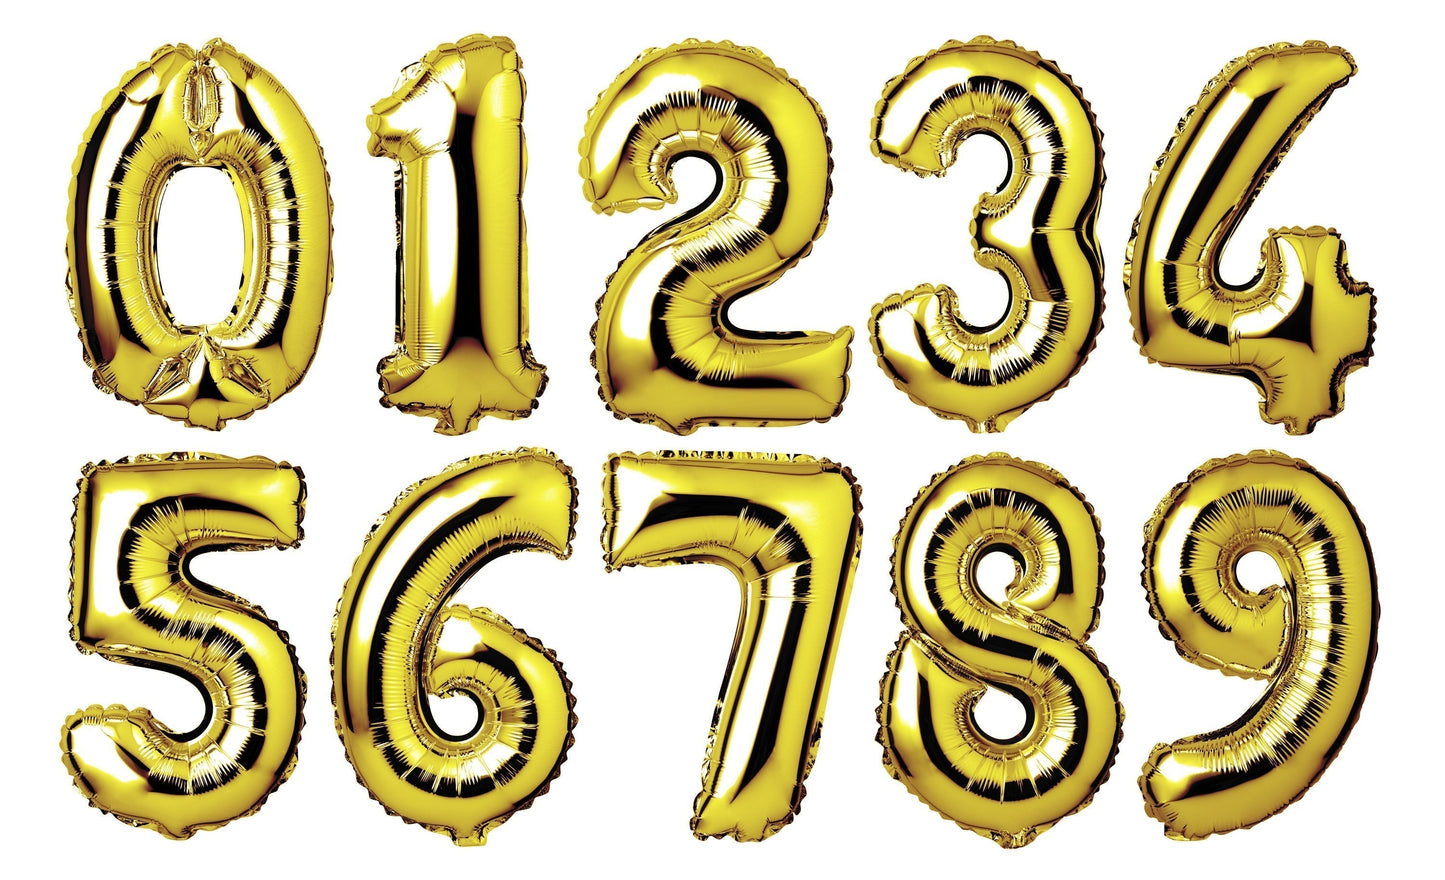 34" Giant Foil Gold Number 6 Balloon